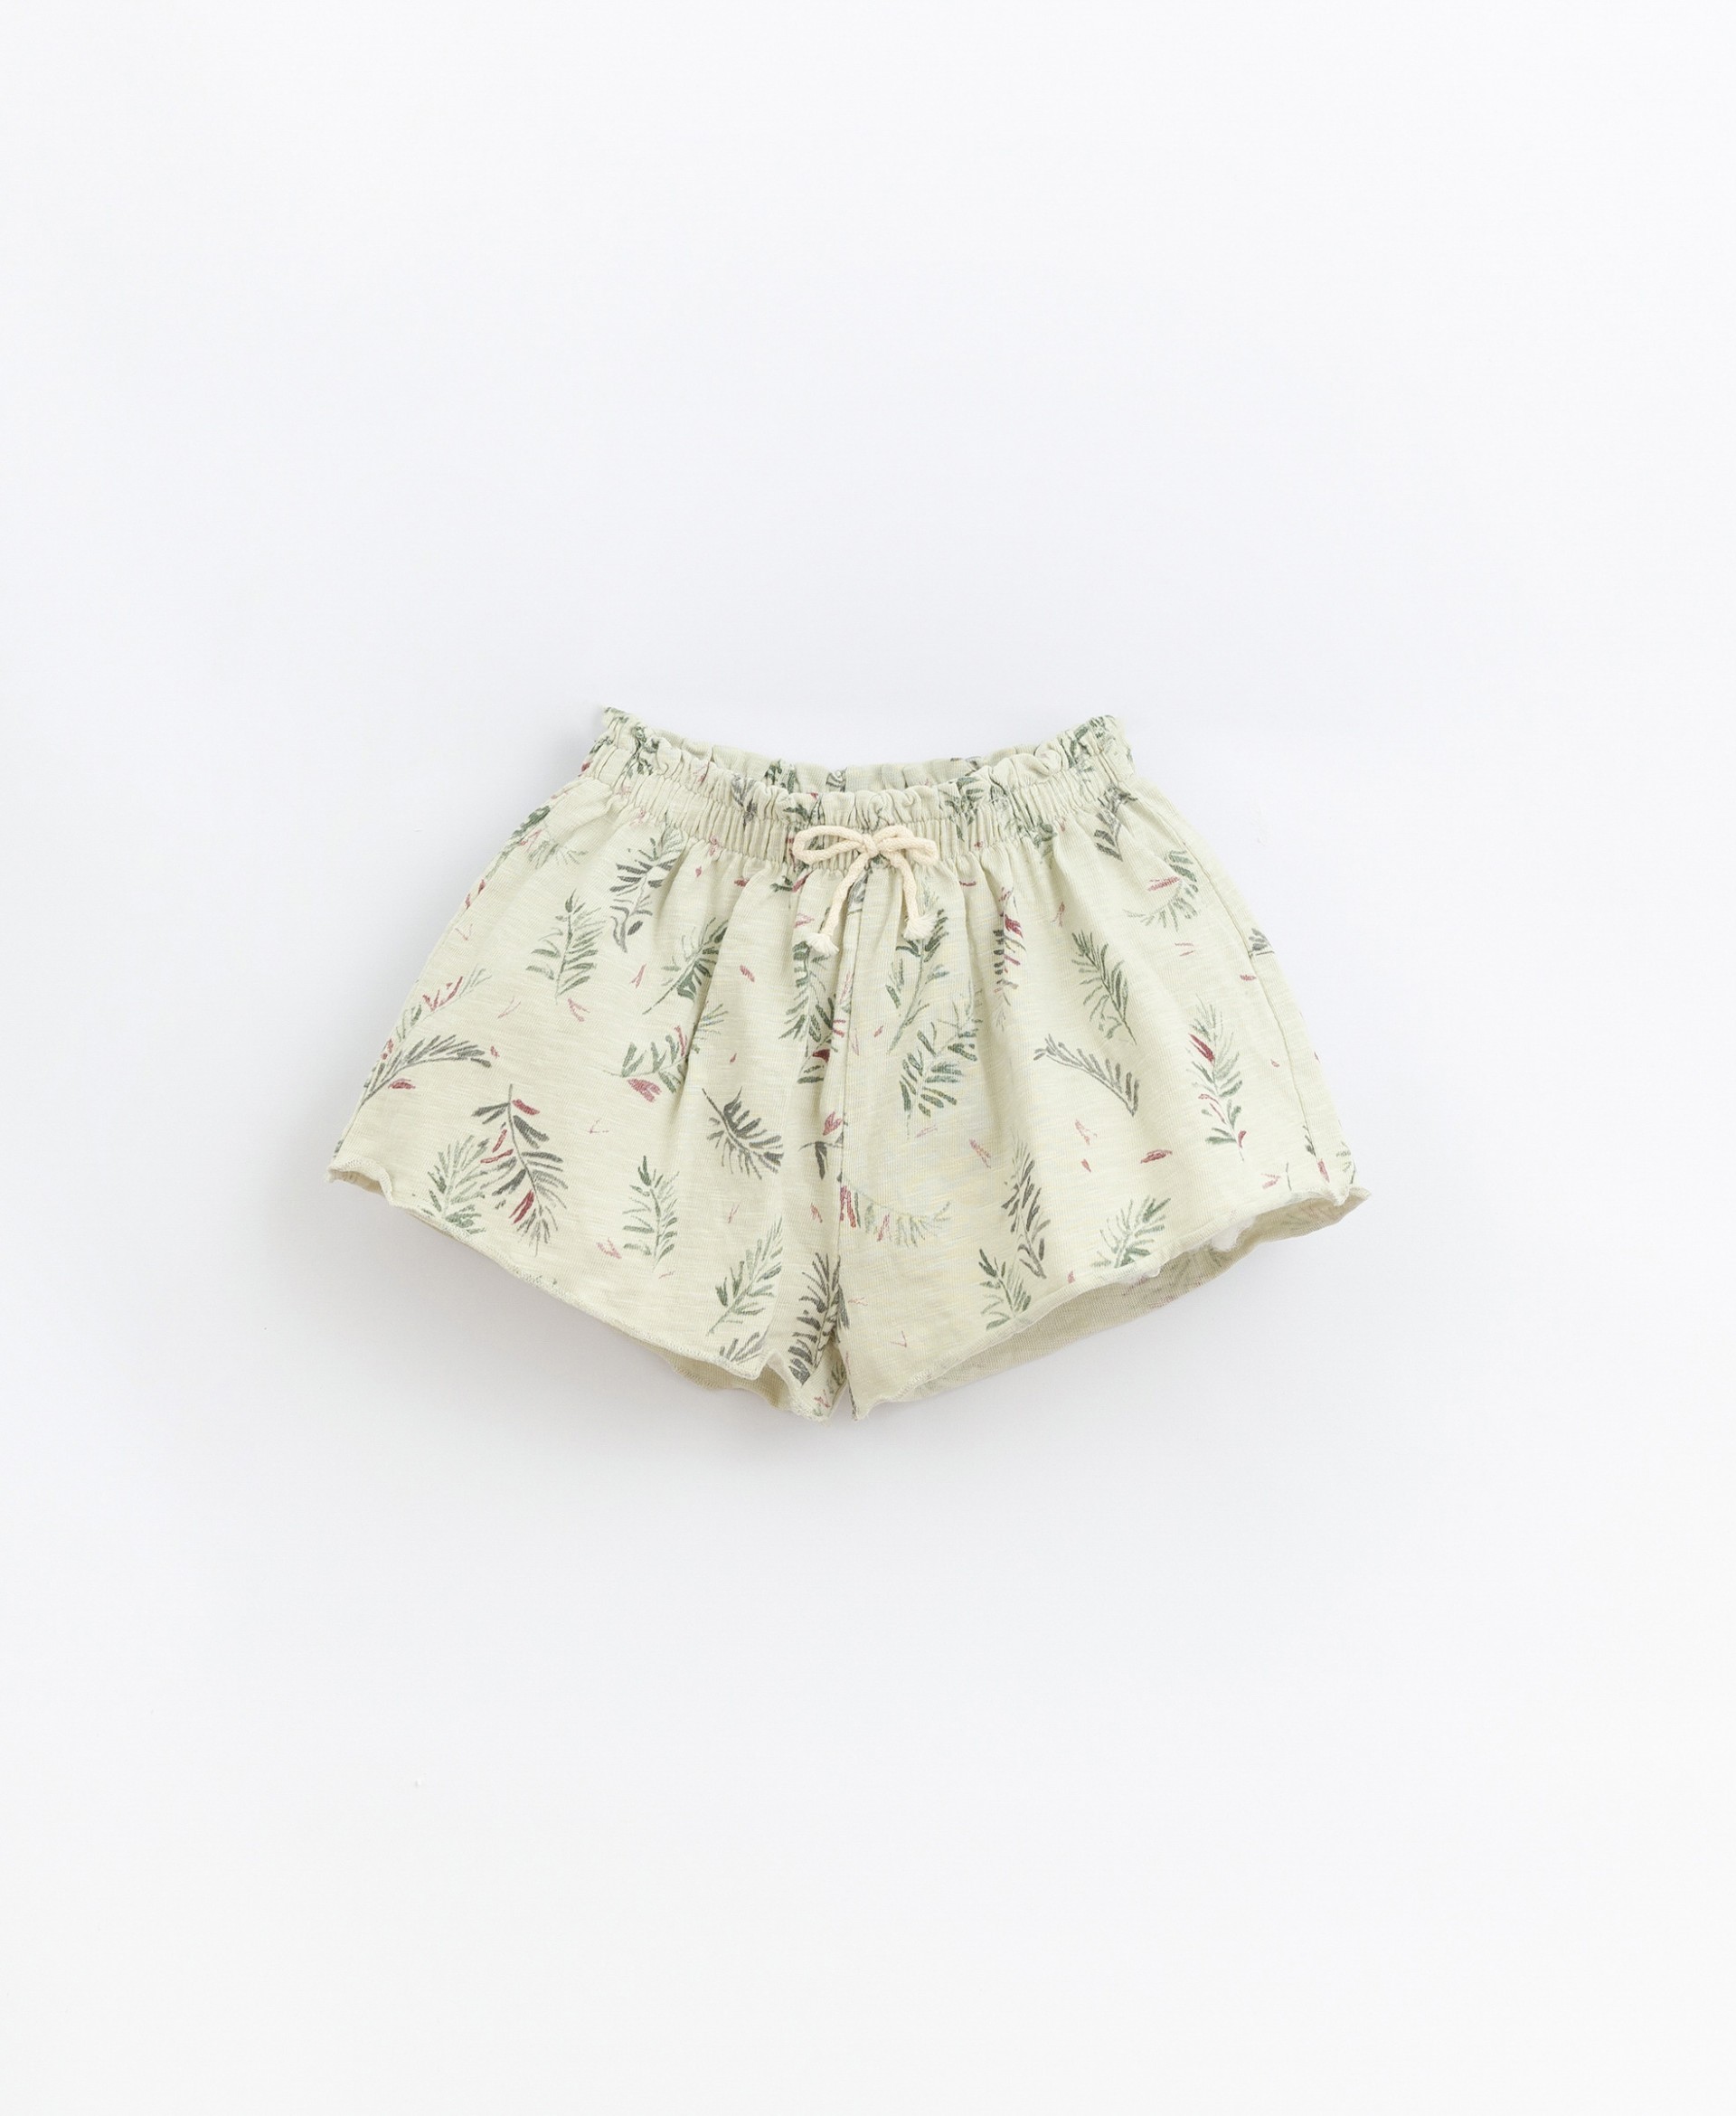 Shorts in printed organic cotton | Basketry